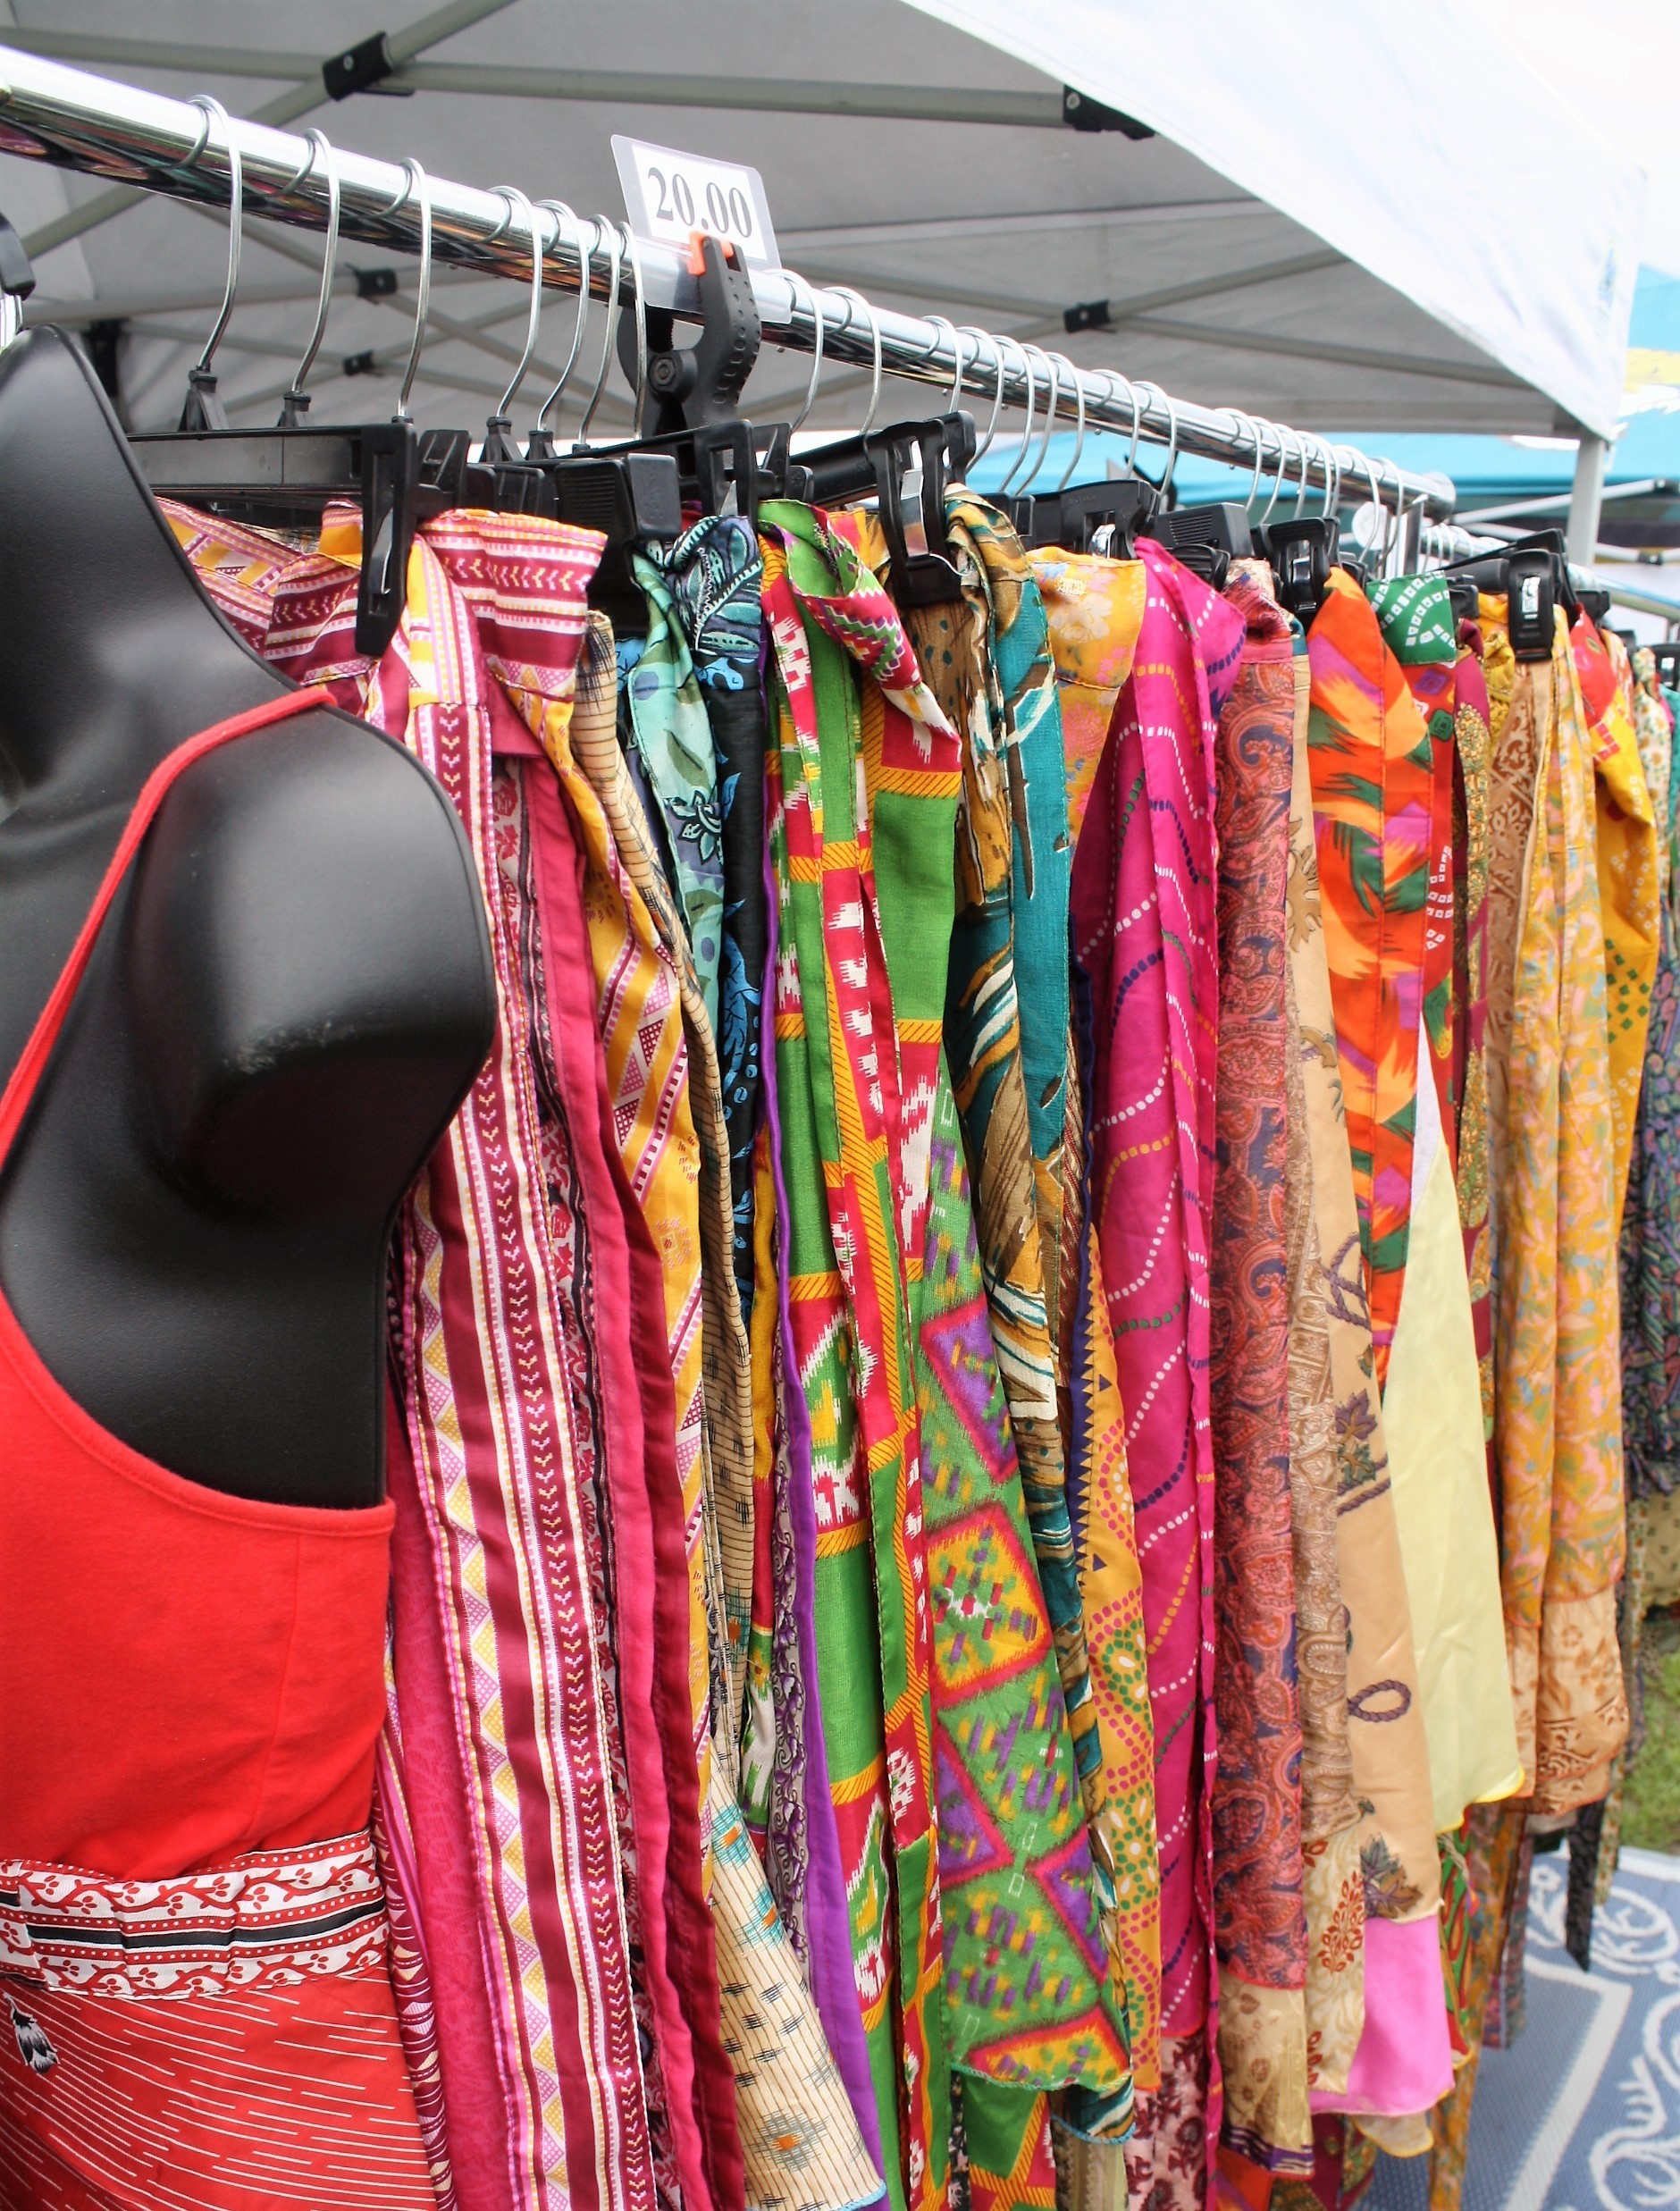 Colorful sarongs and beachwear were among the offerings at the farmer’s market.